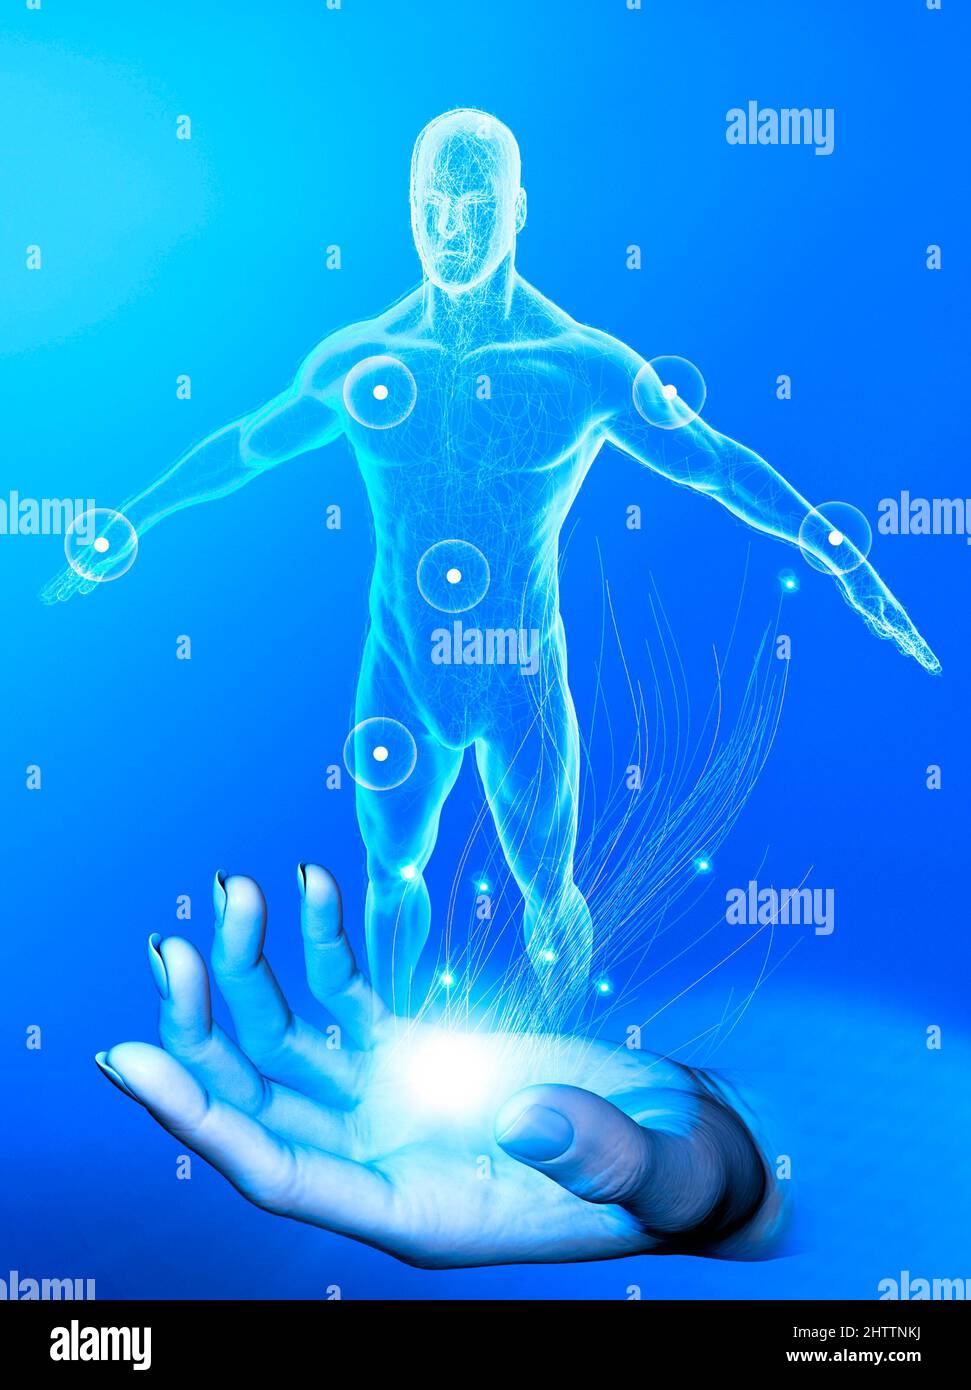 Creation of life, artificial intelligence. Human anatomy and control of all vital function. Man in the palm of the hand. New technologies and future Stock Photo